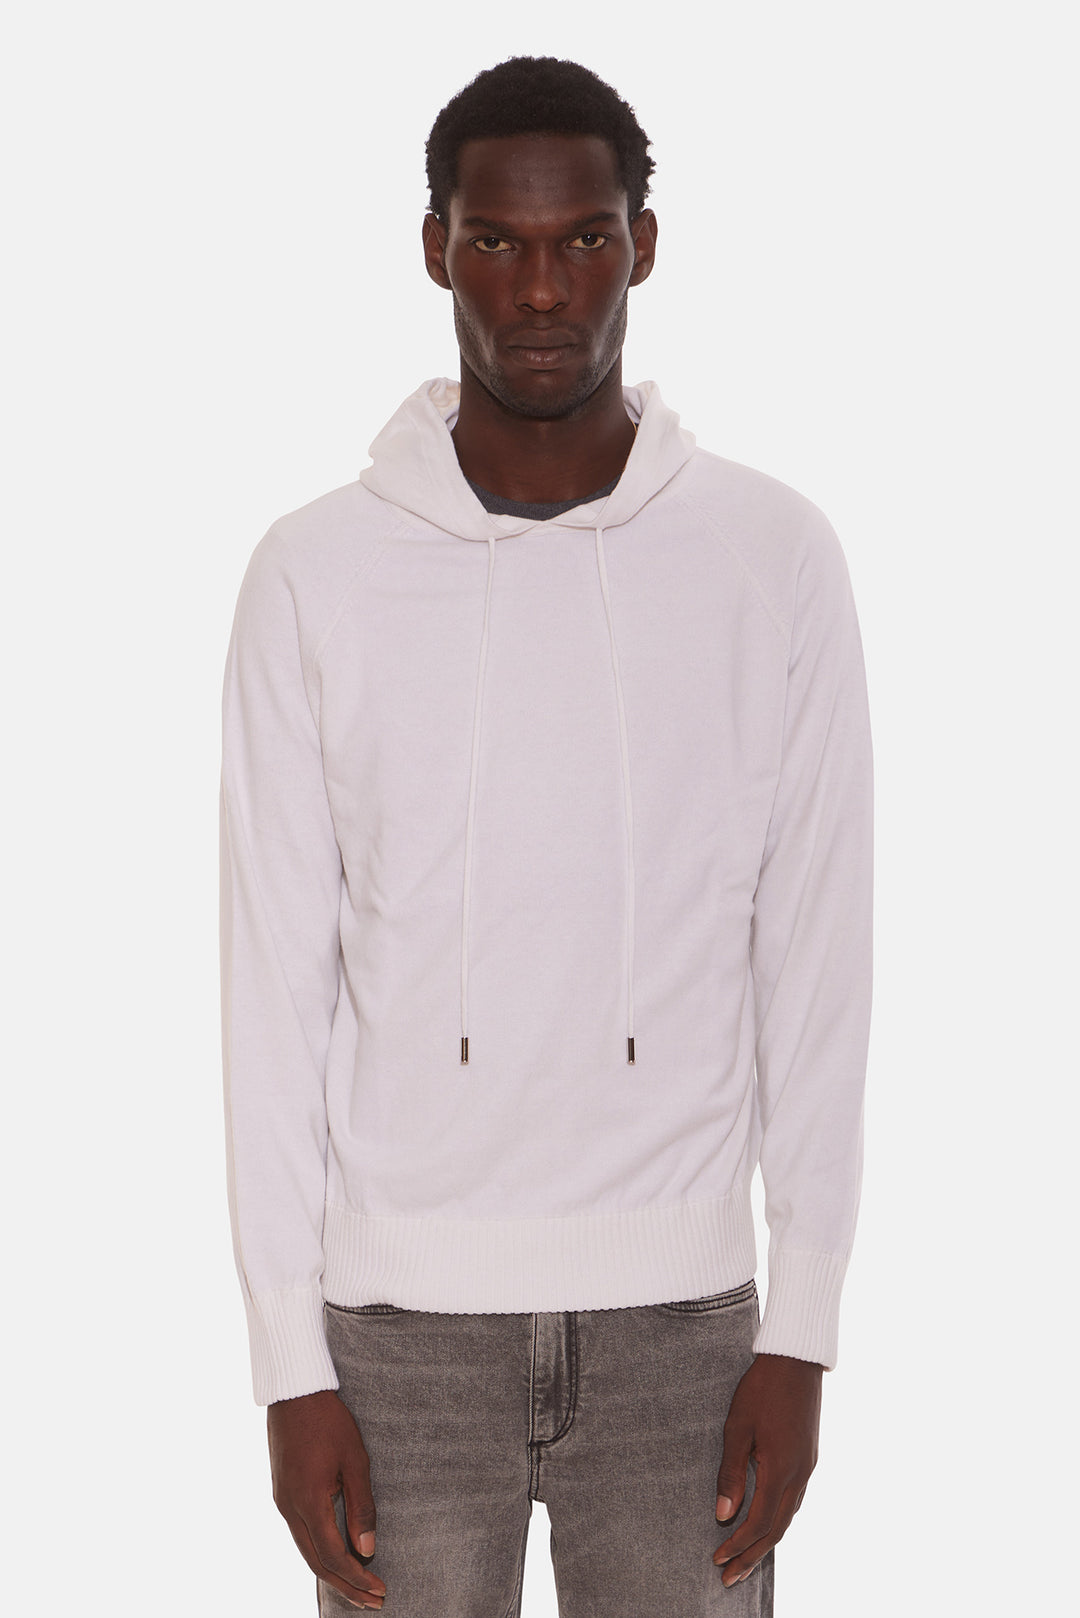 Reade Pullover Hoodie White